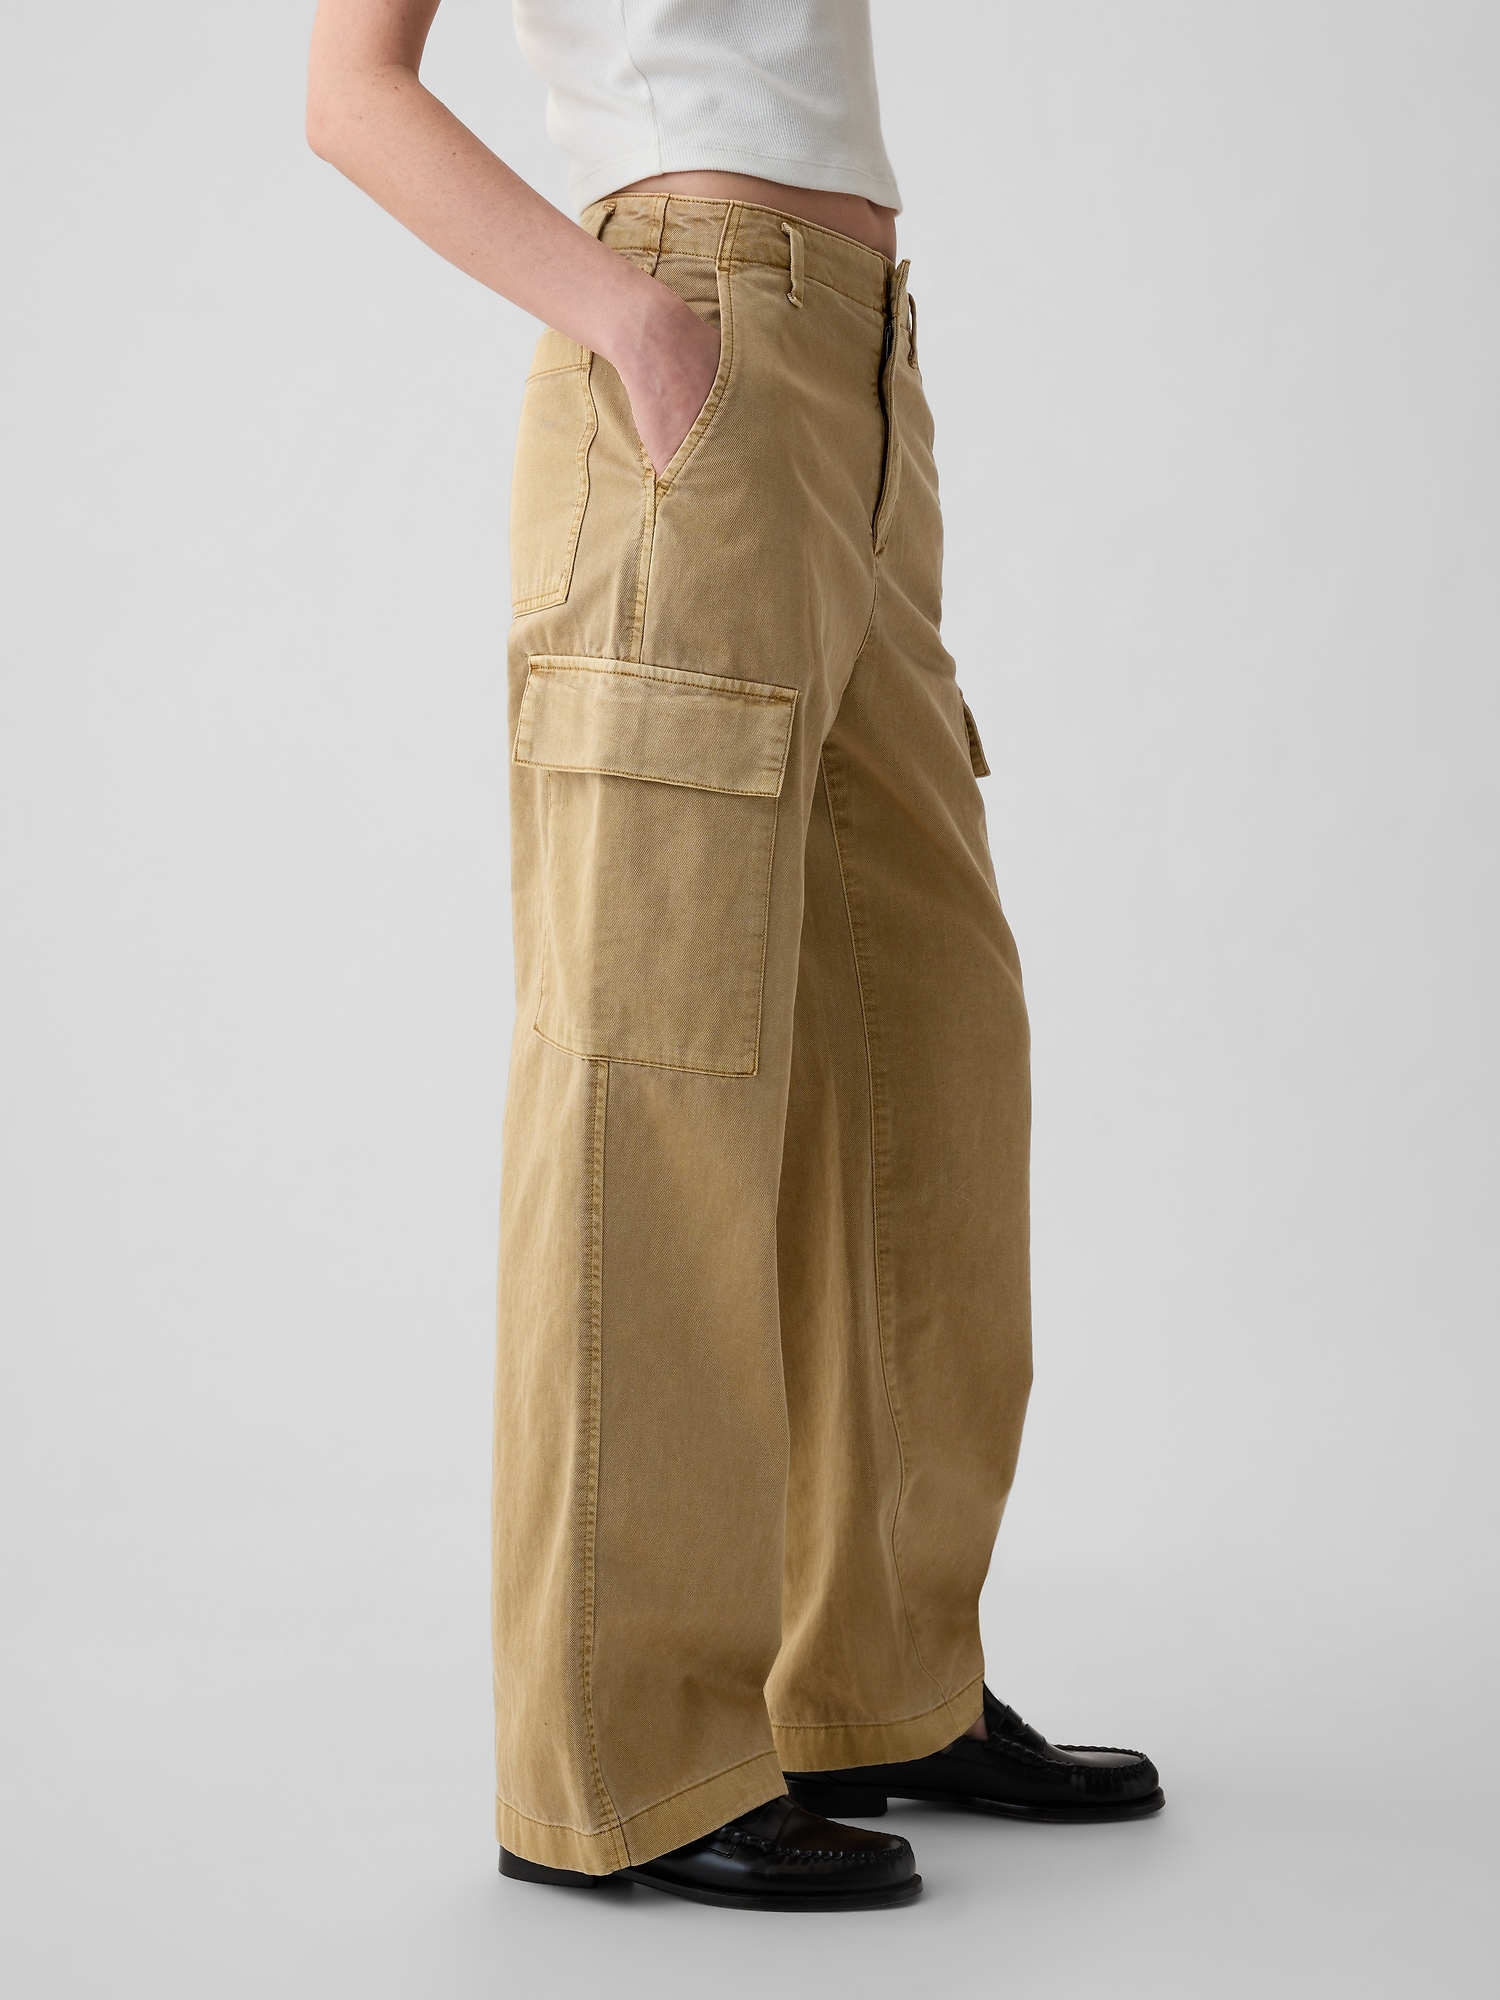 Selected Homme loose fit cargo pants in beige